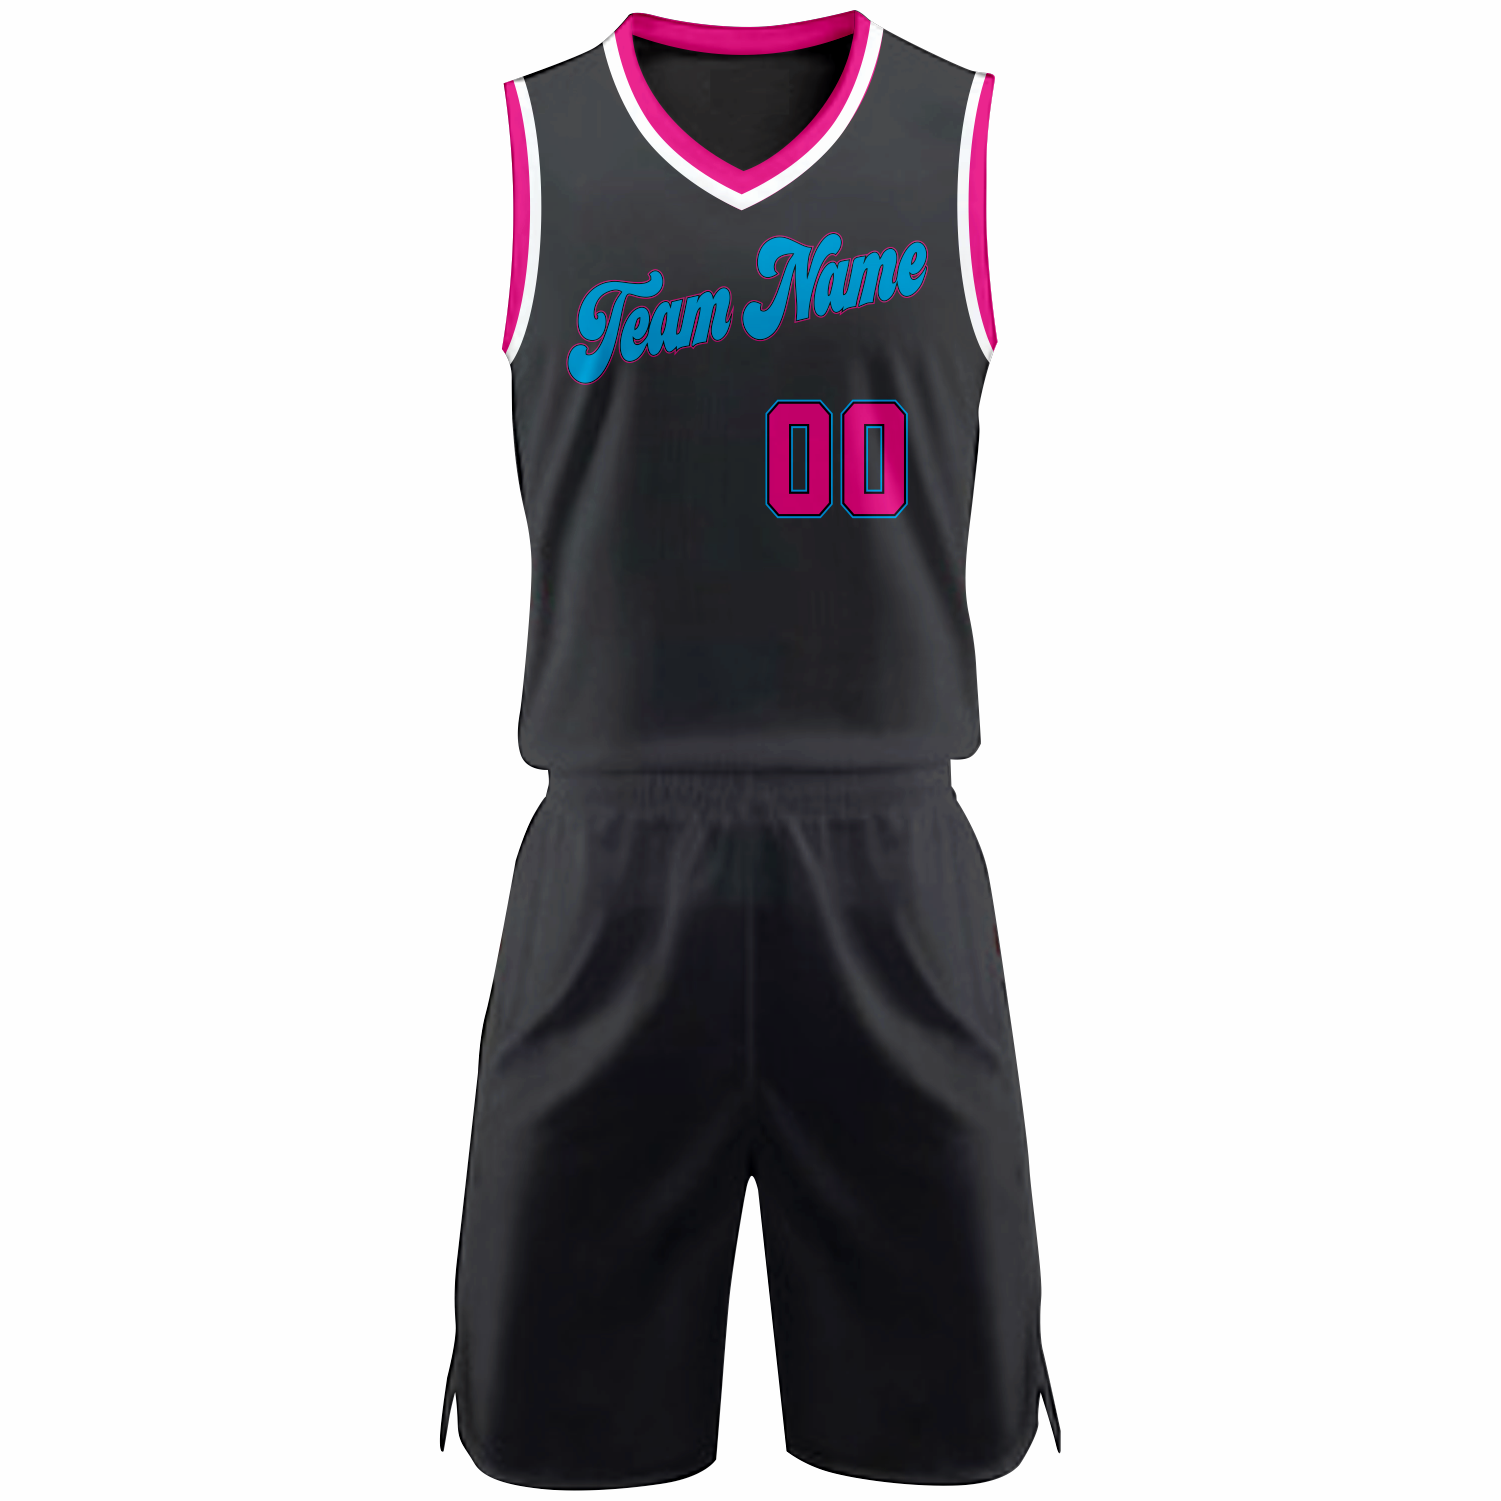 R.C. Gamble youth jersey